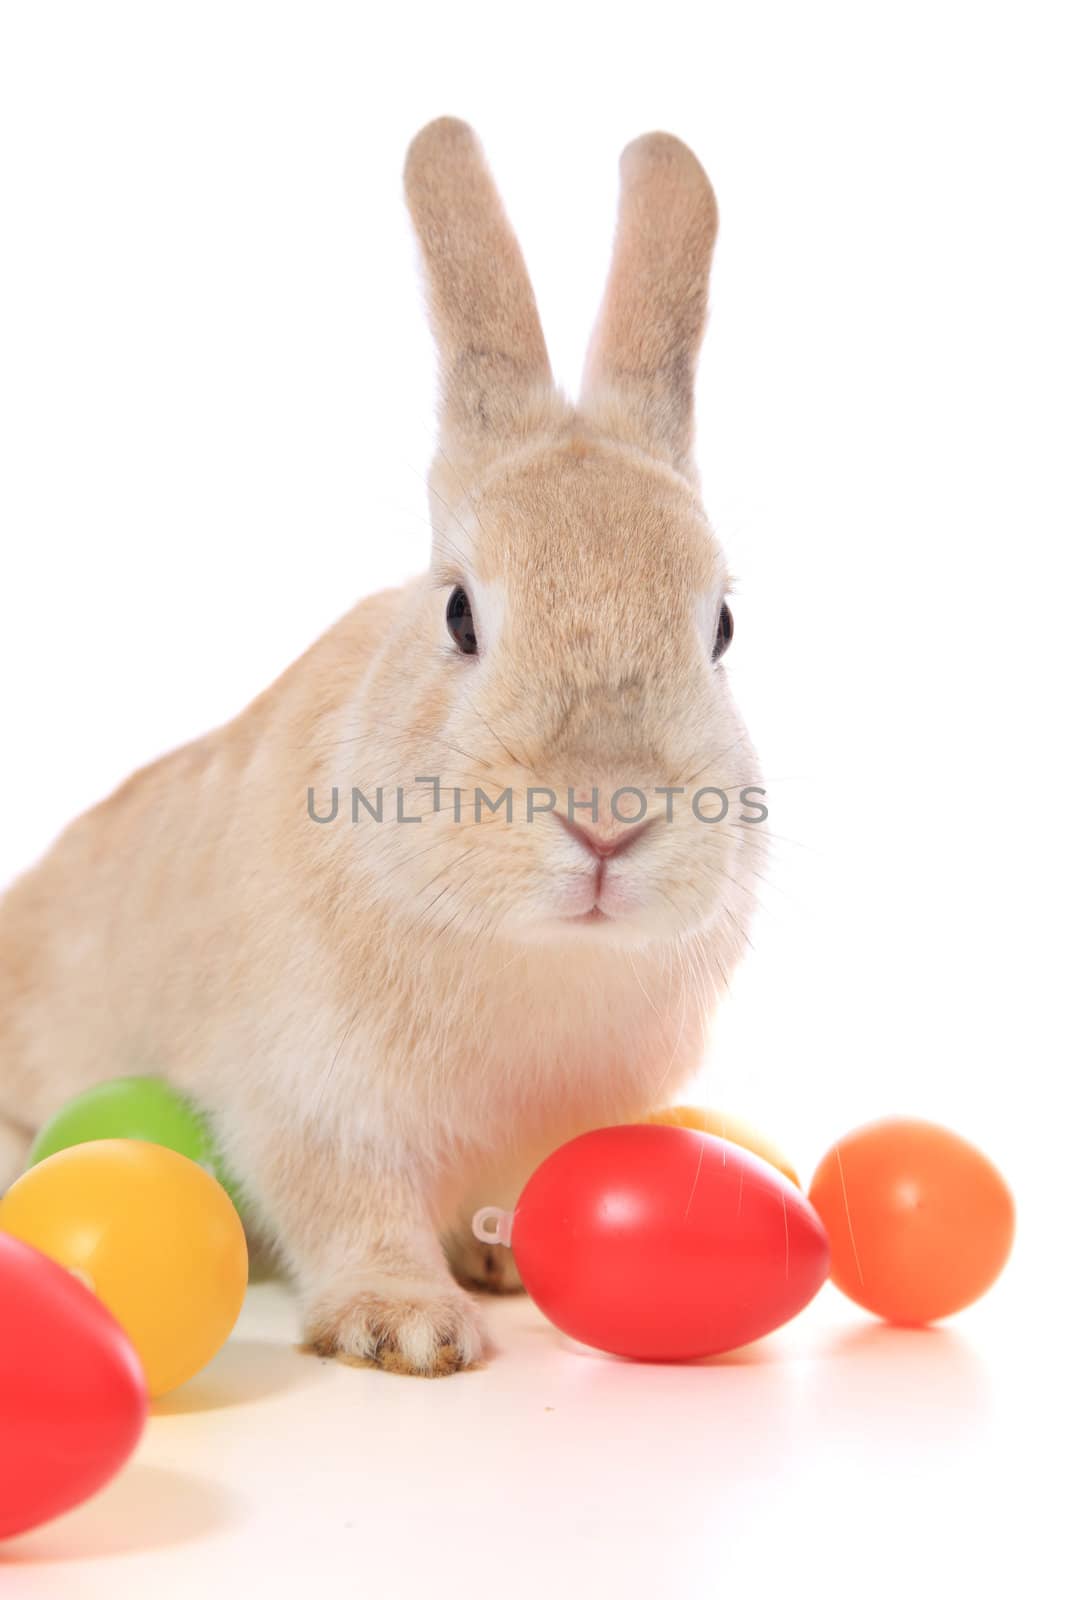 Cute little easter bunny with colored eggs. All on white background.